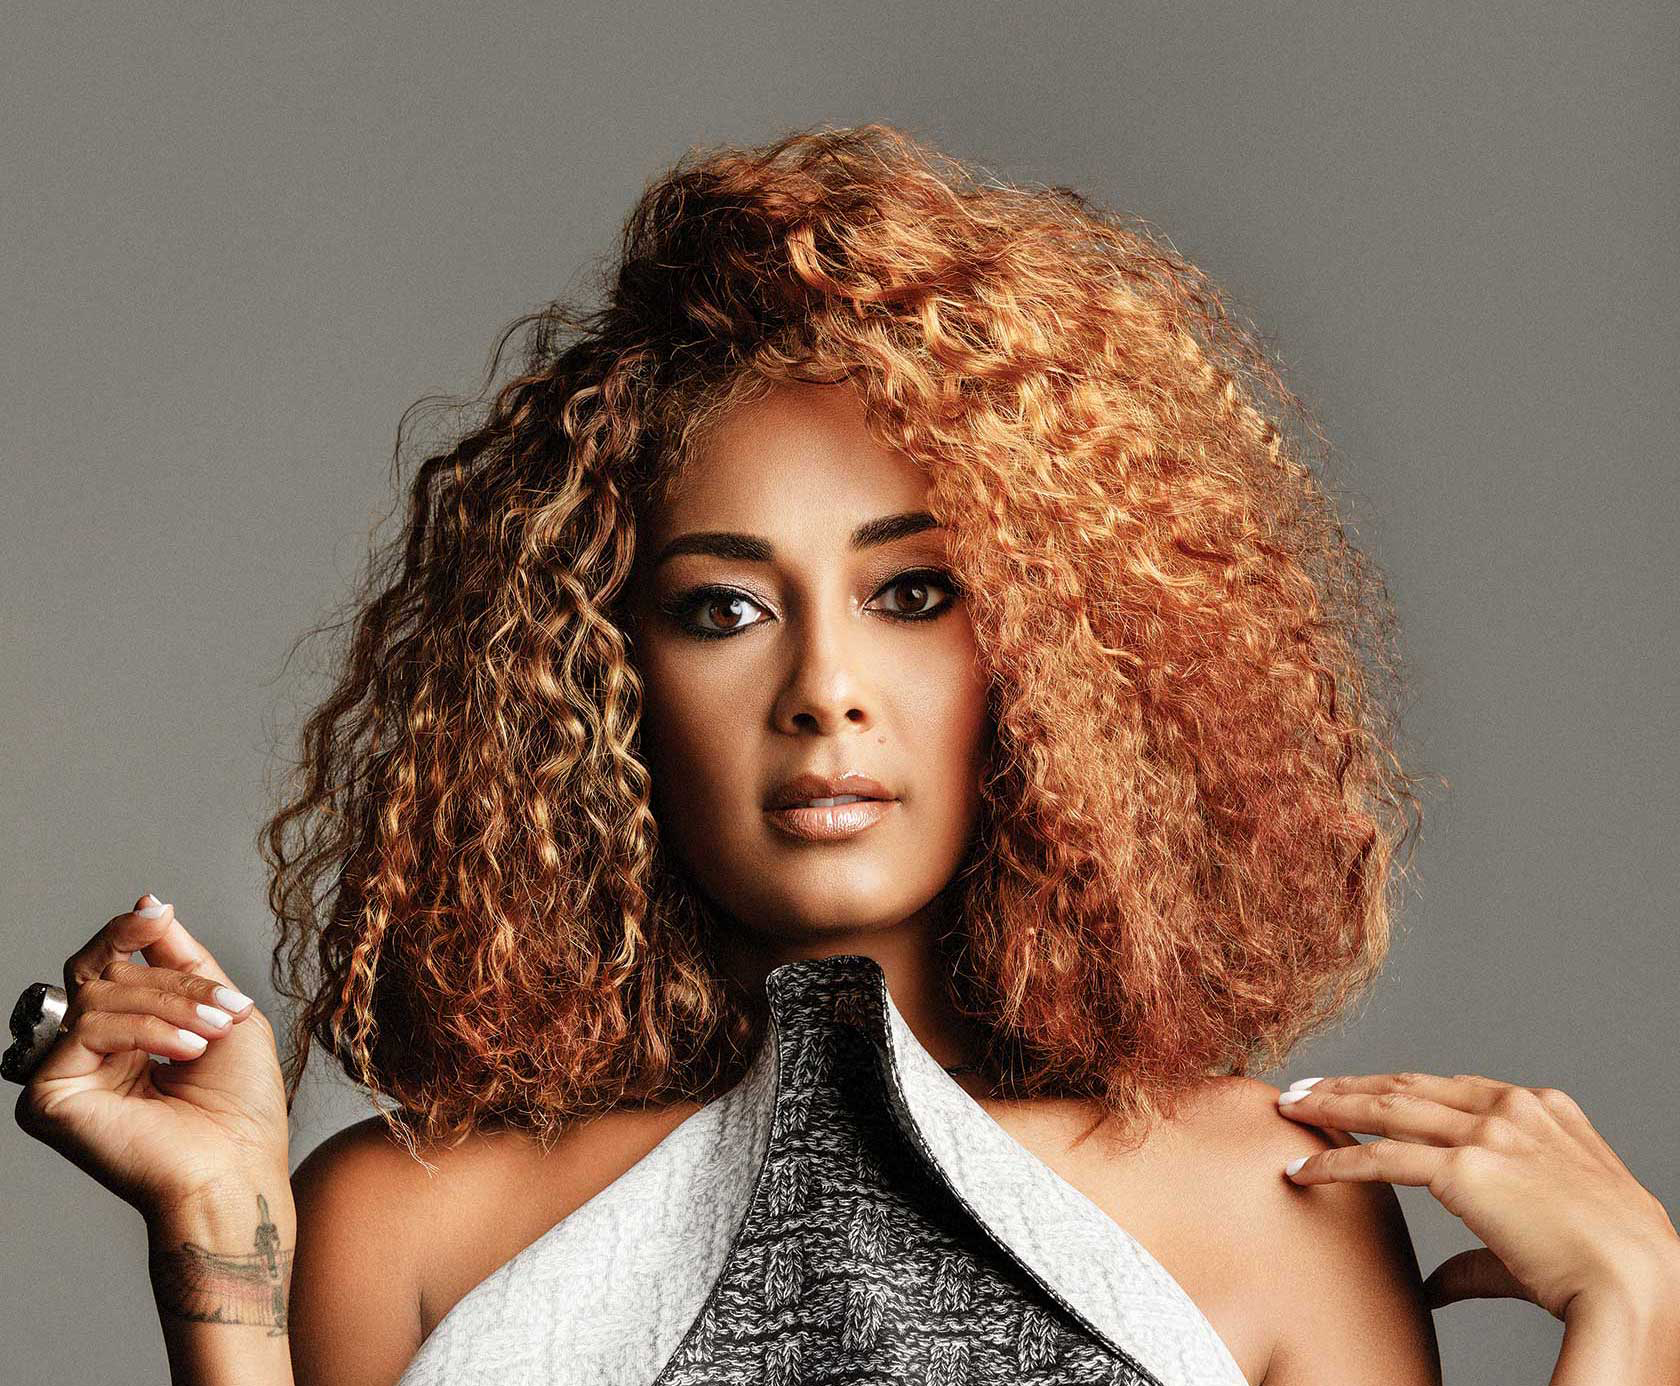 Amanda Seales Exits “The Real” Daytime Talk Show Due to Lack of Black Voices